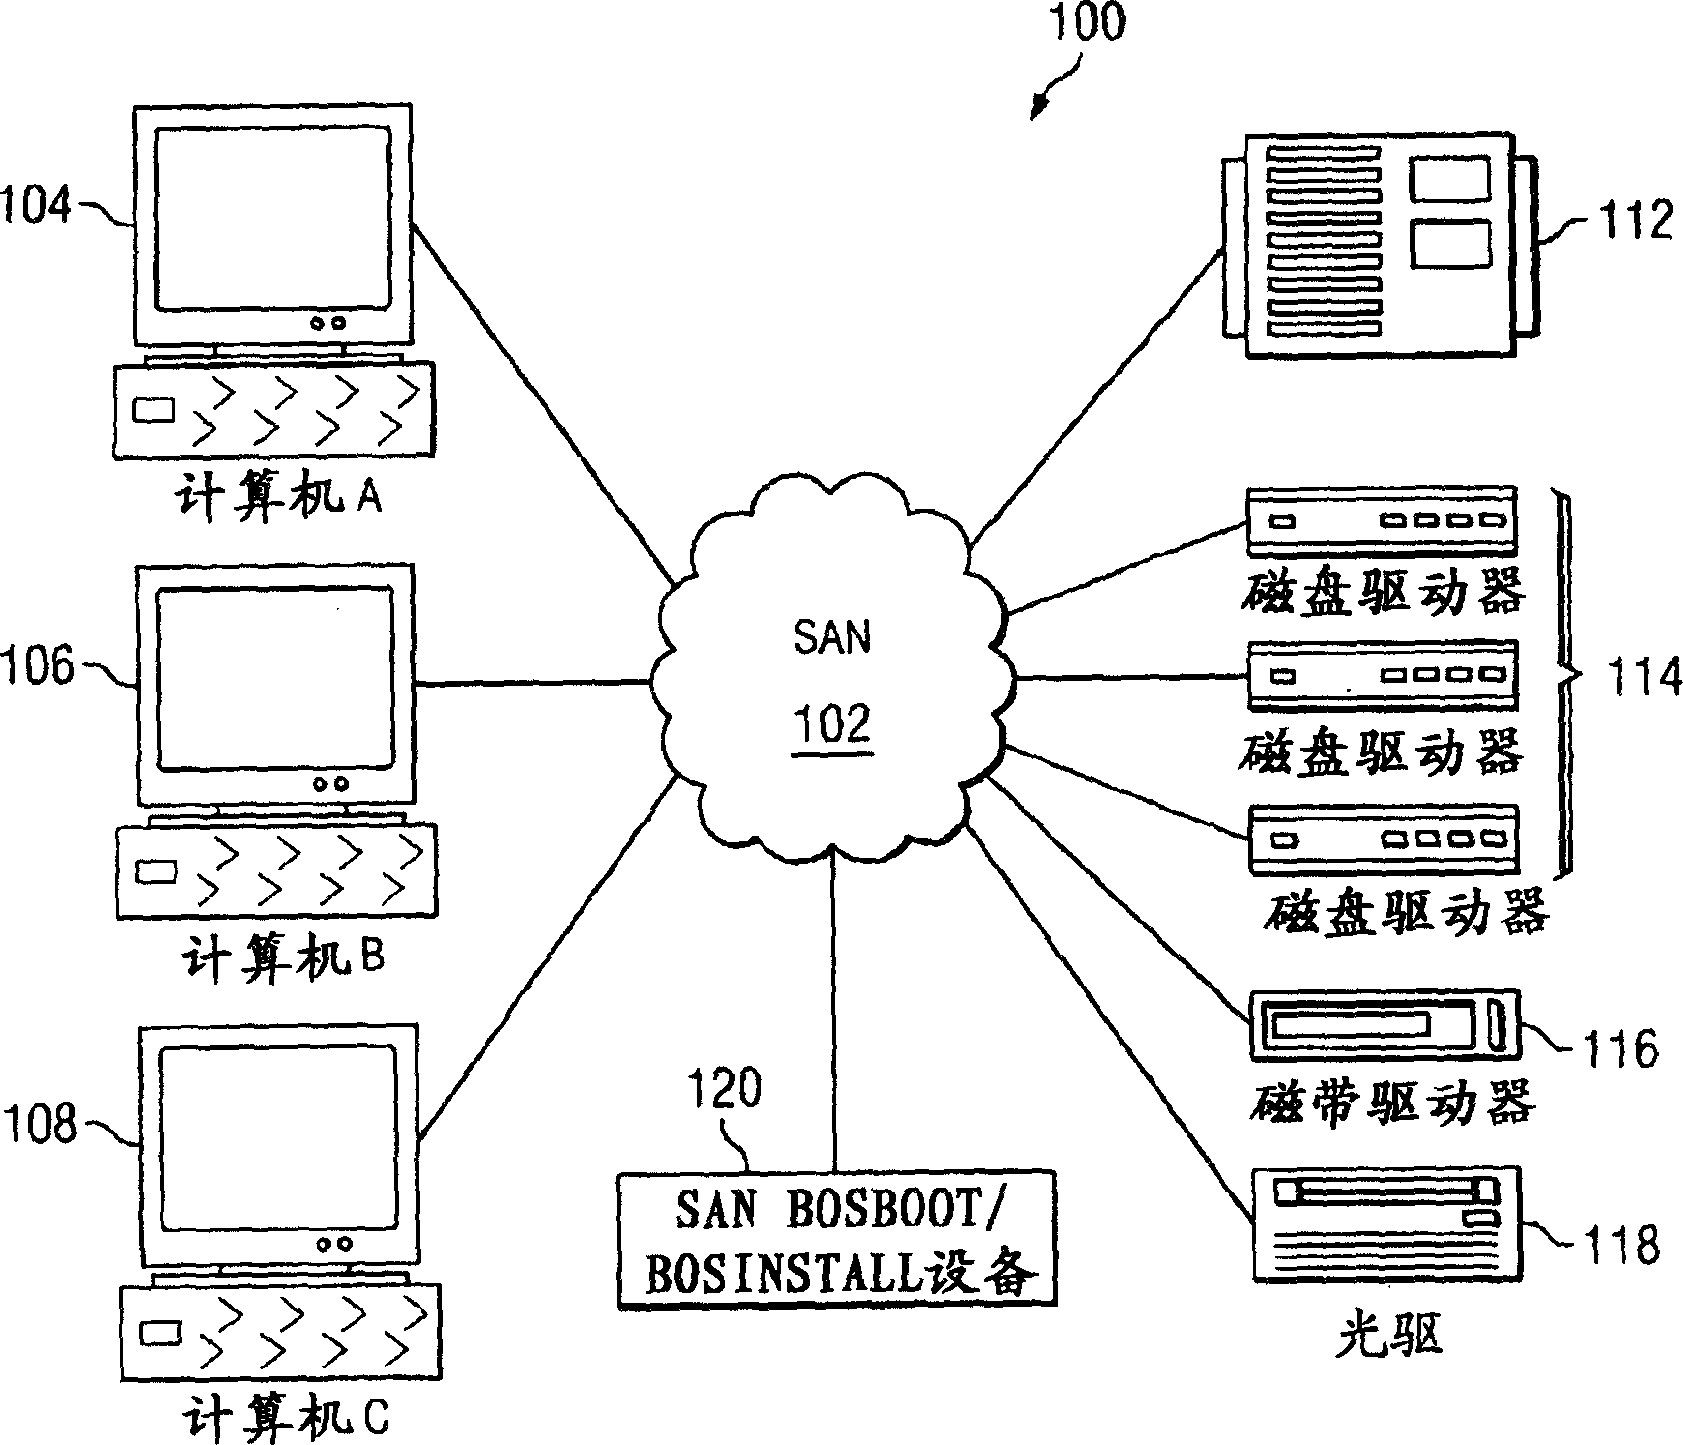 Method and apparatus for perfoming boot, maintenance, or install operations on a storage area network